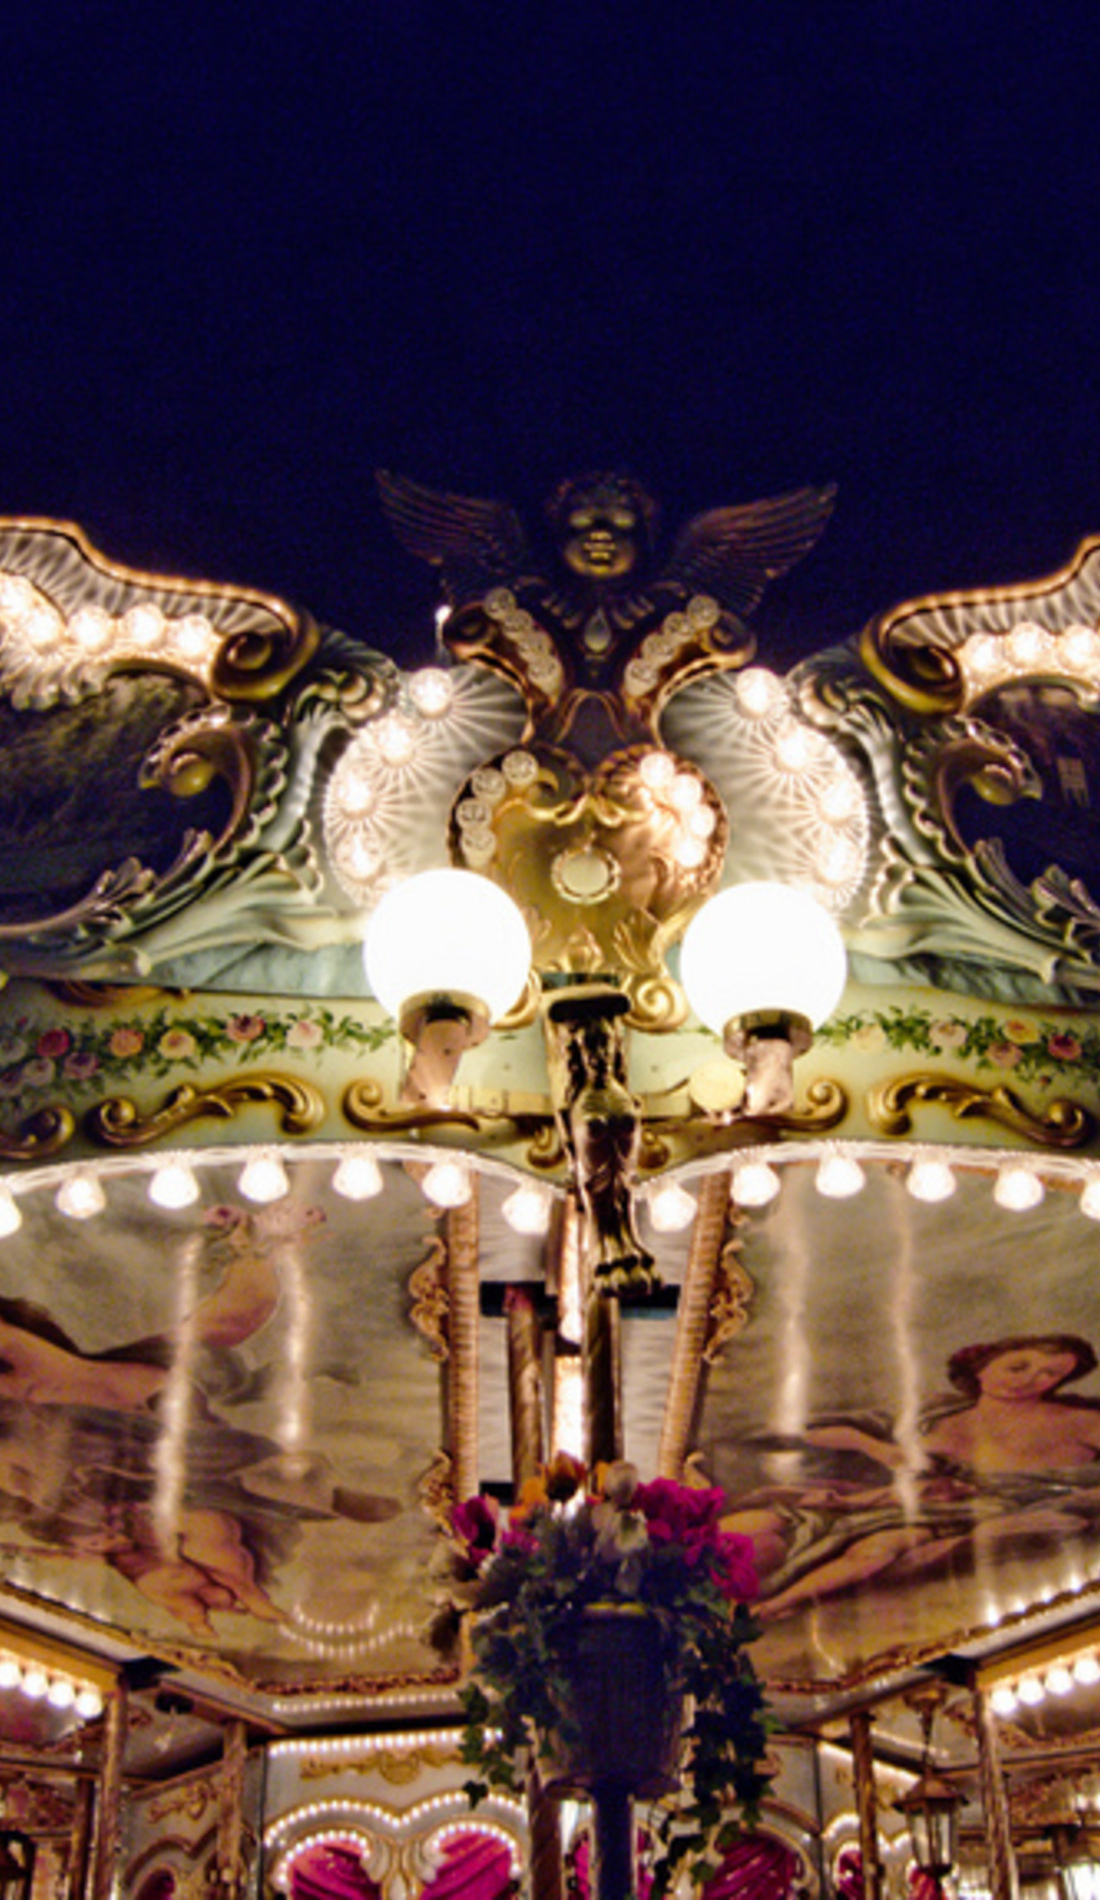 A Carousel live event